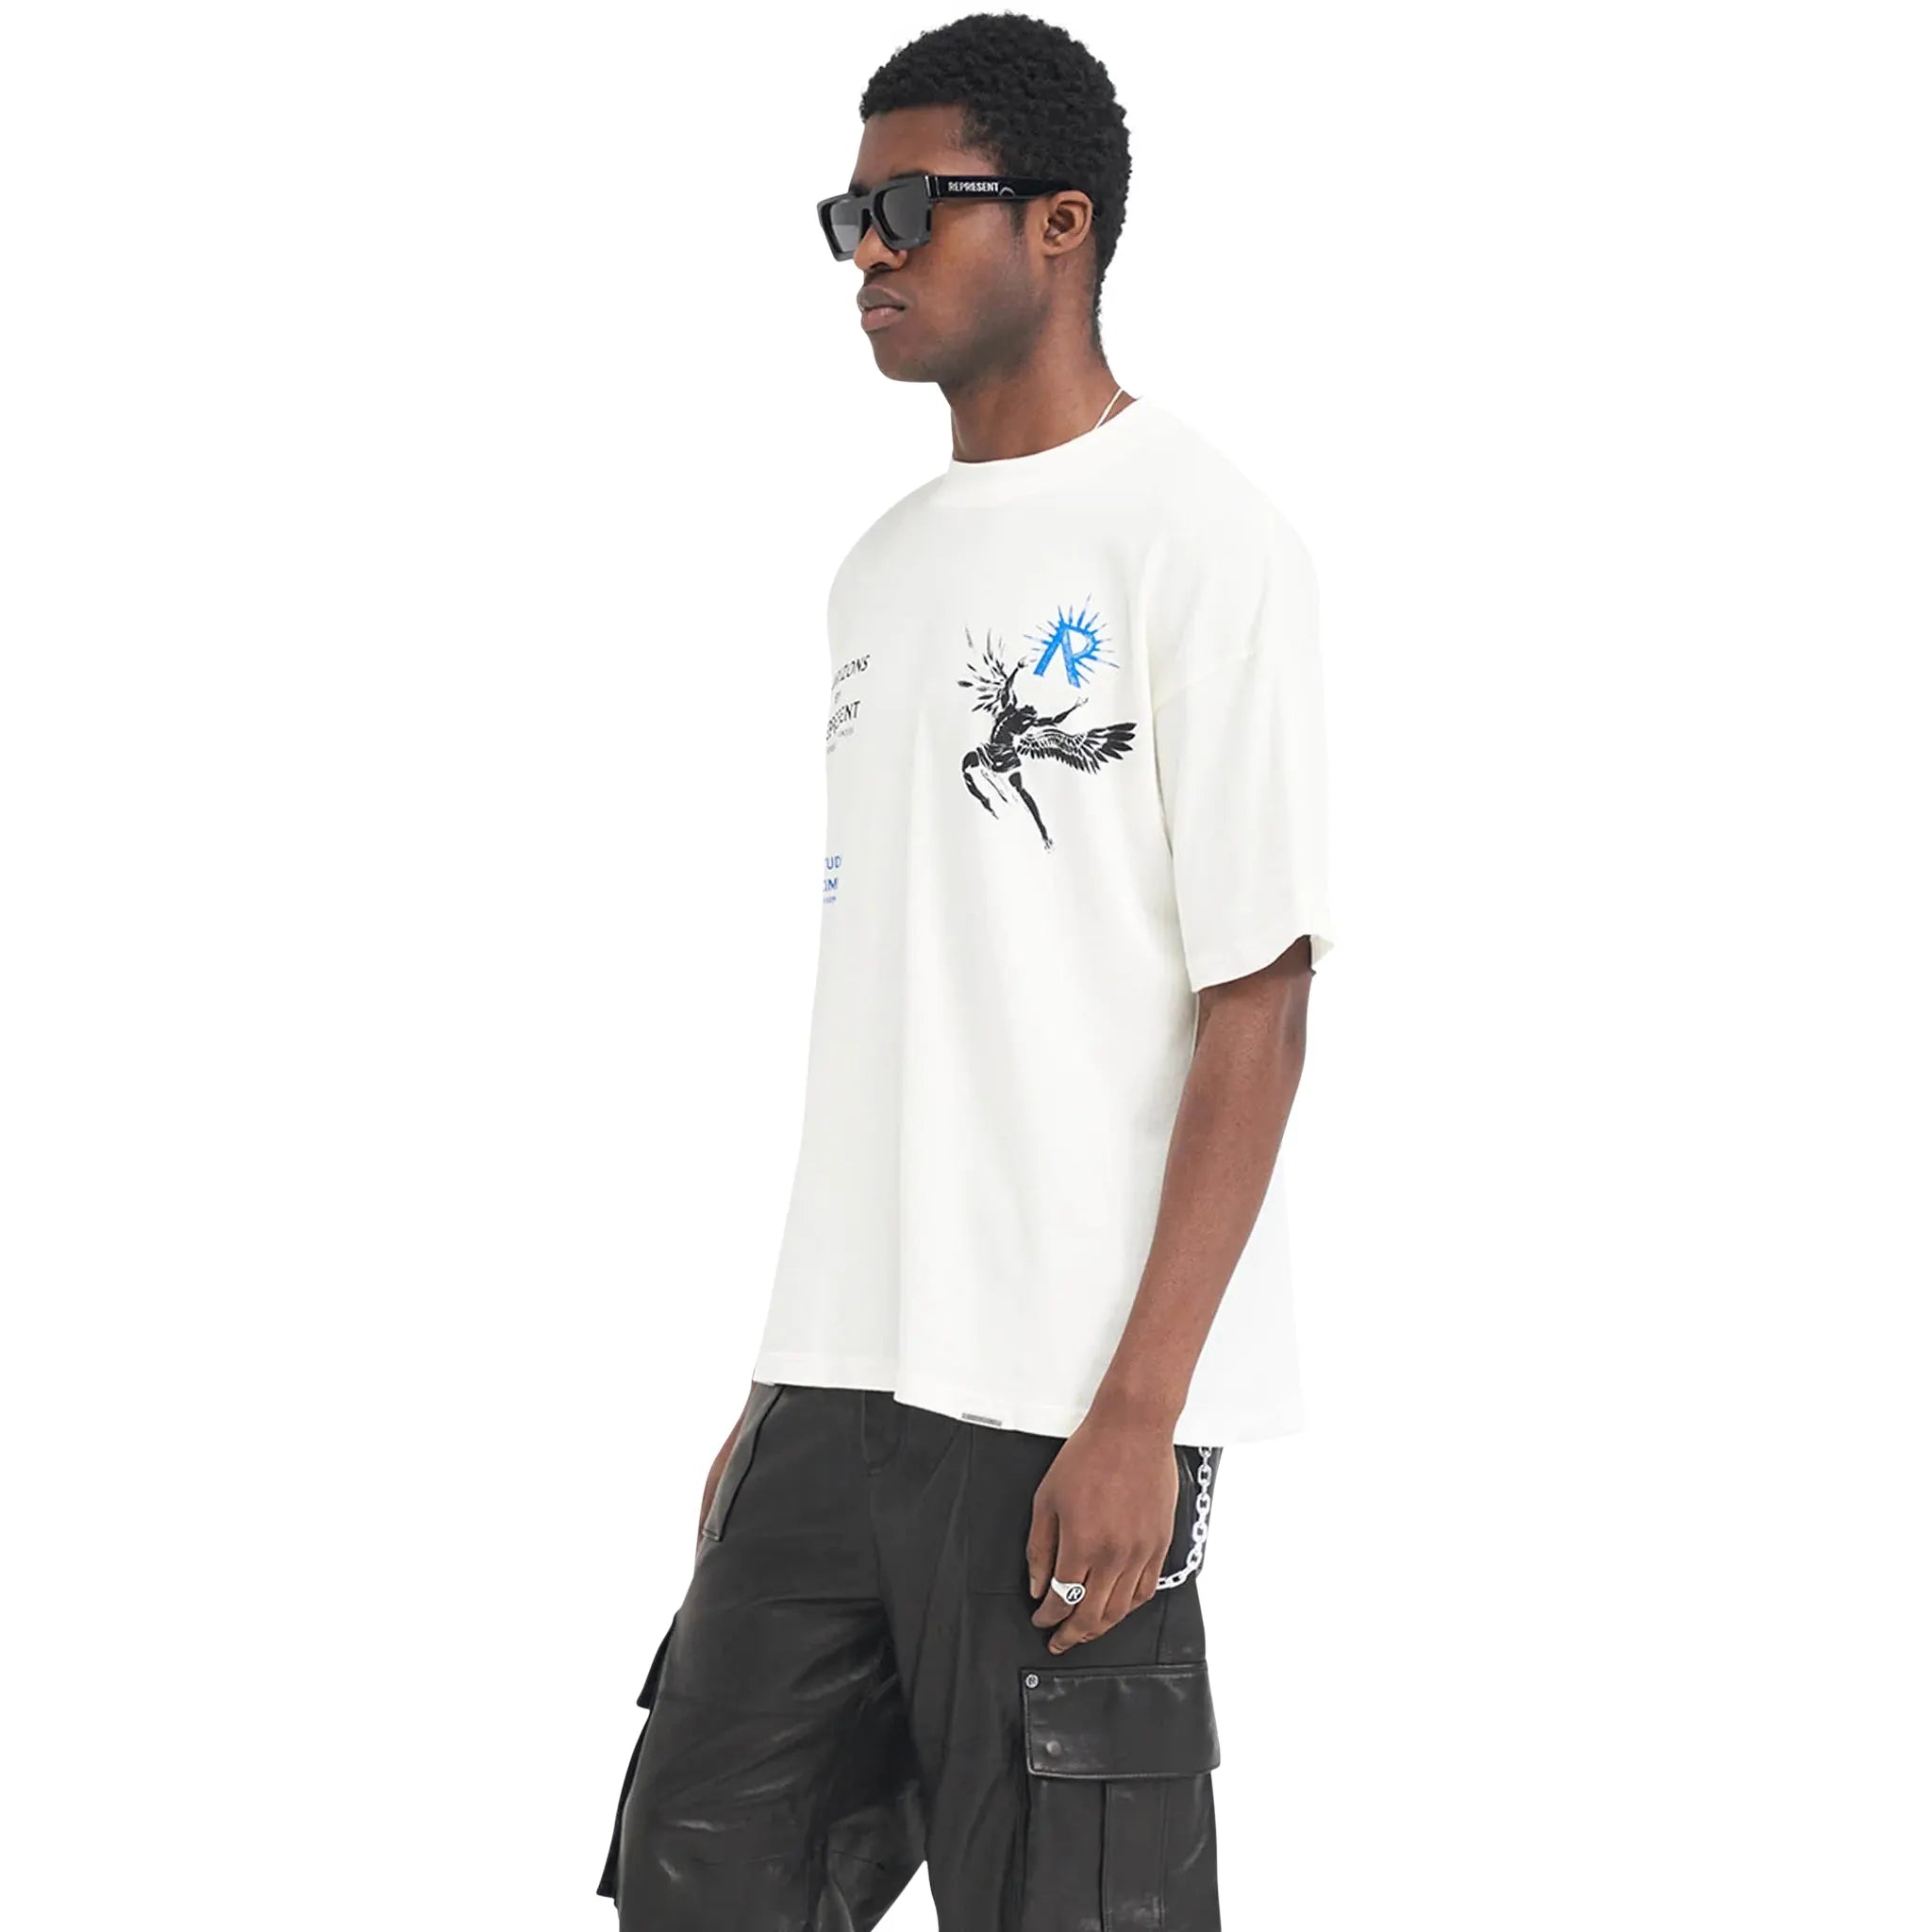 Model view of Represent Icarus Flat White T Shirt MLM467-72